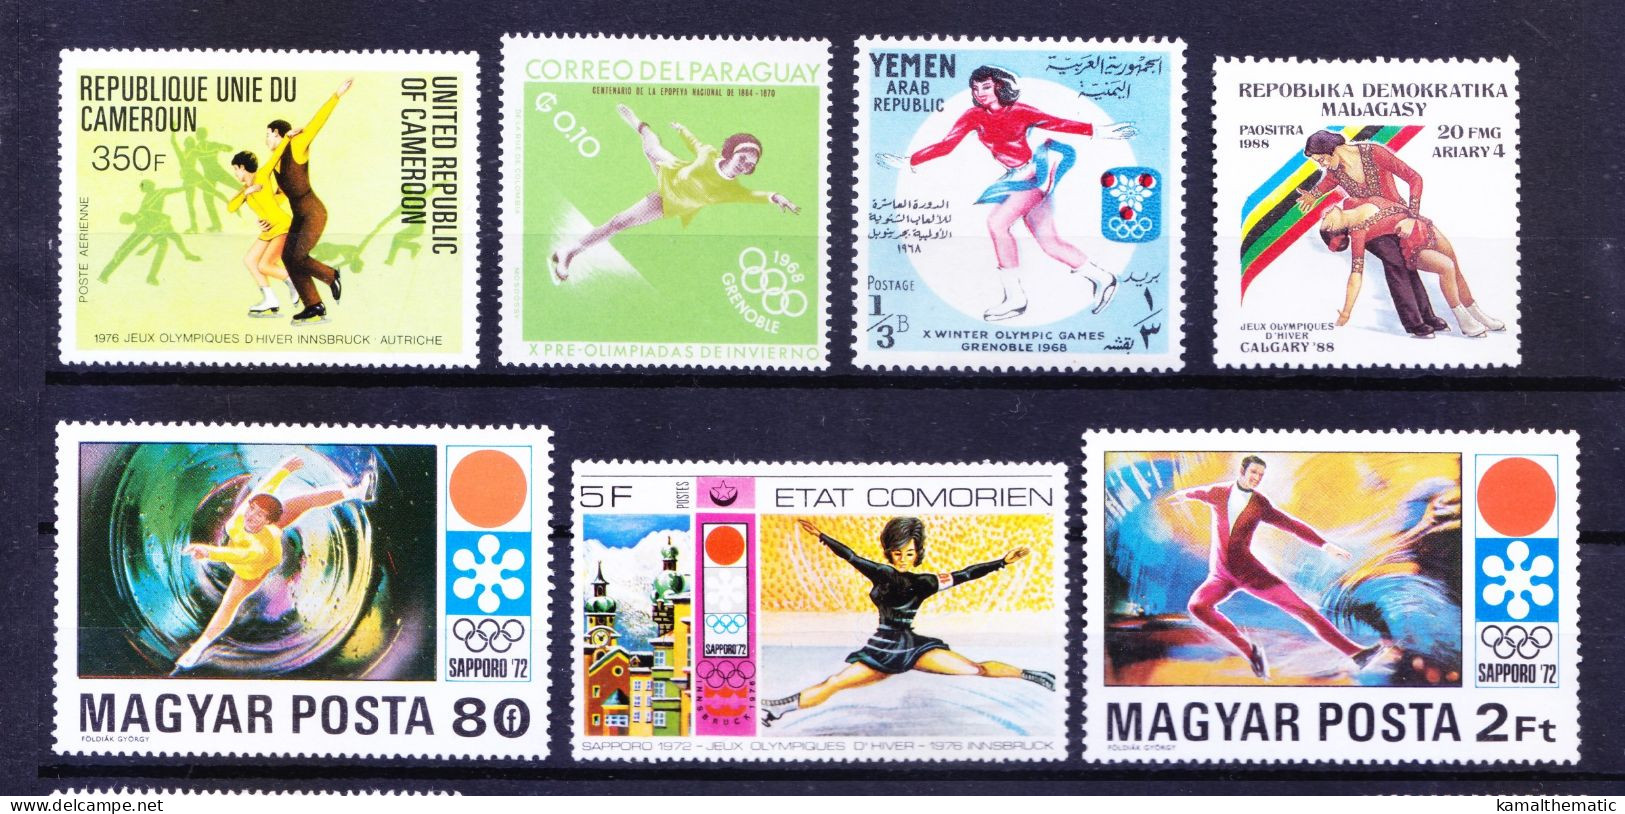 Figure Skating, winter sports Olympics, 50 Different MNH stamps, Rare collection